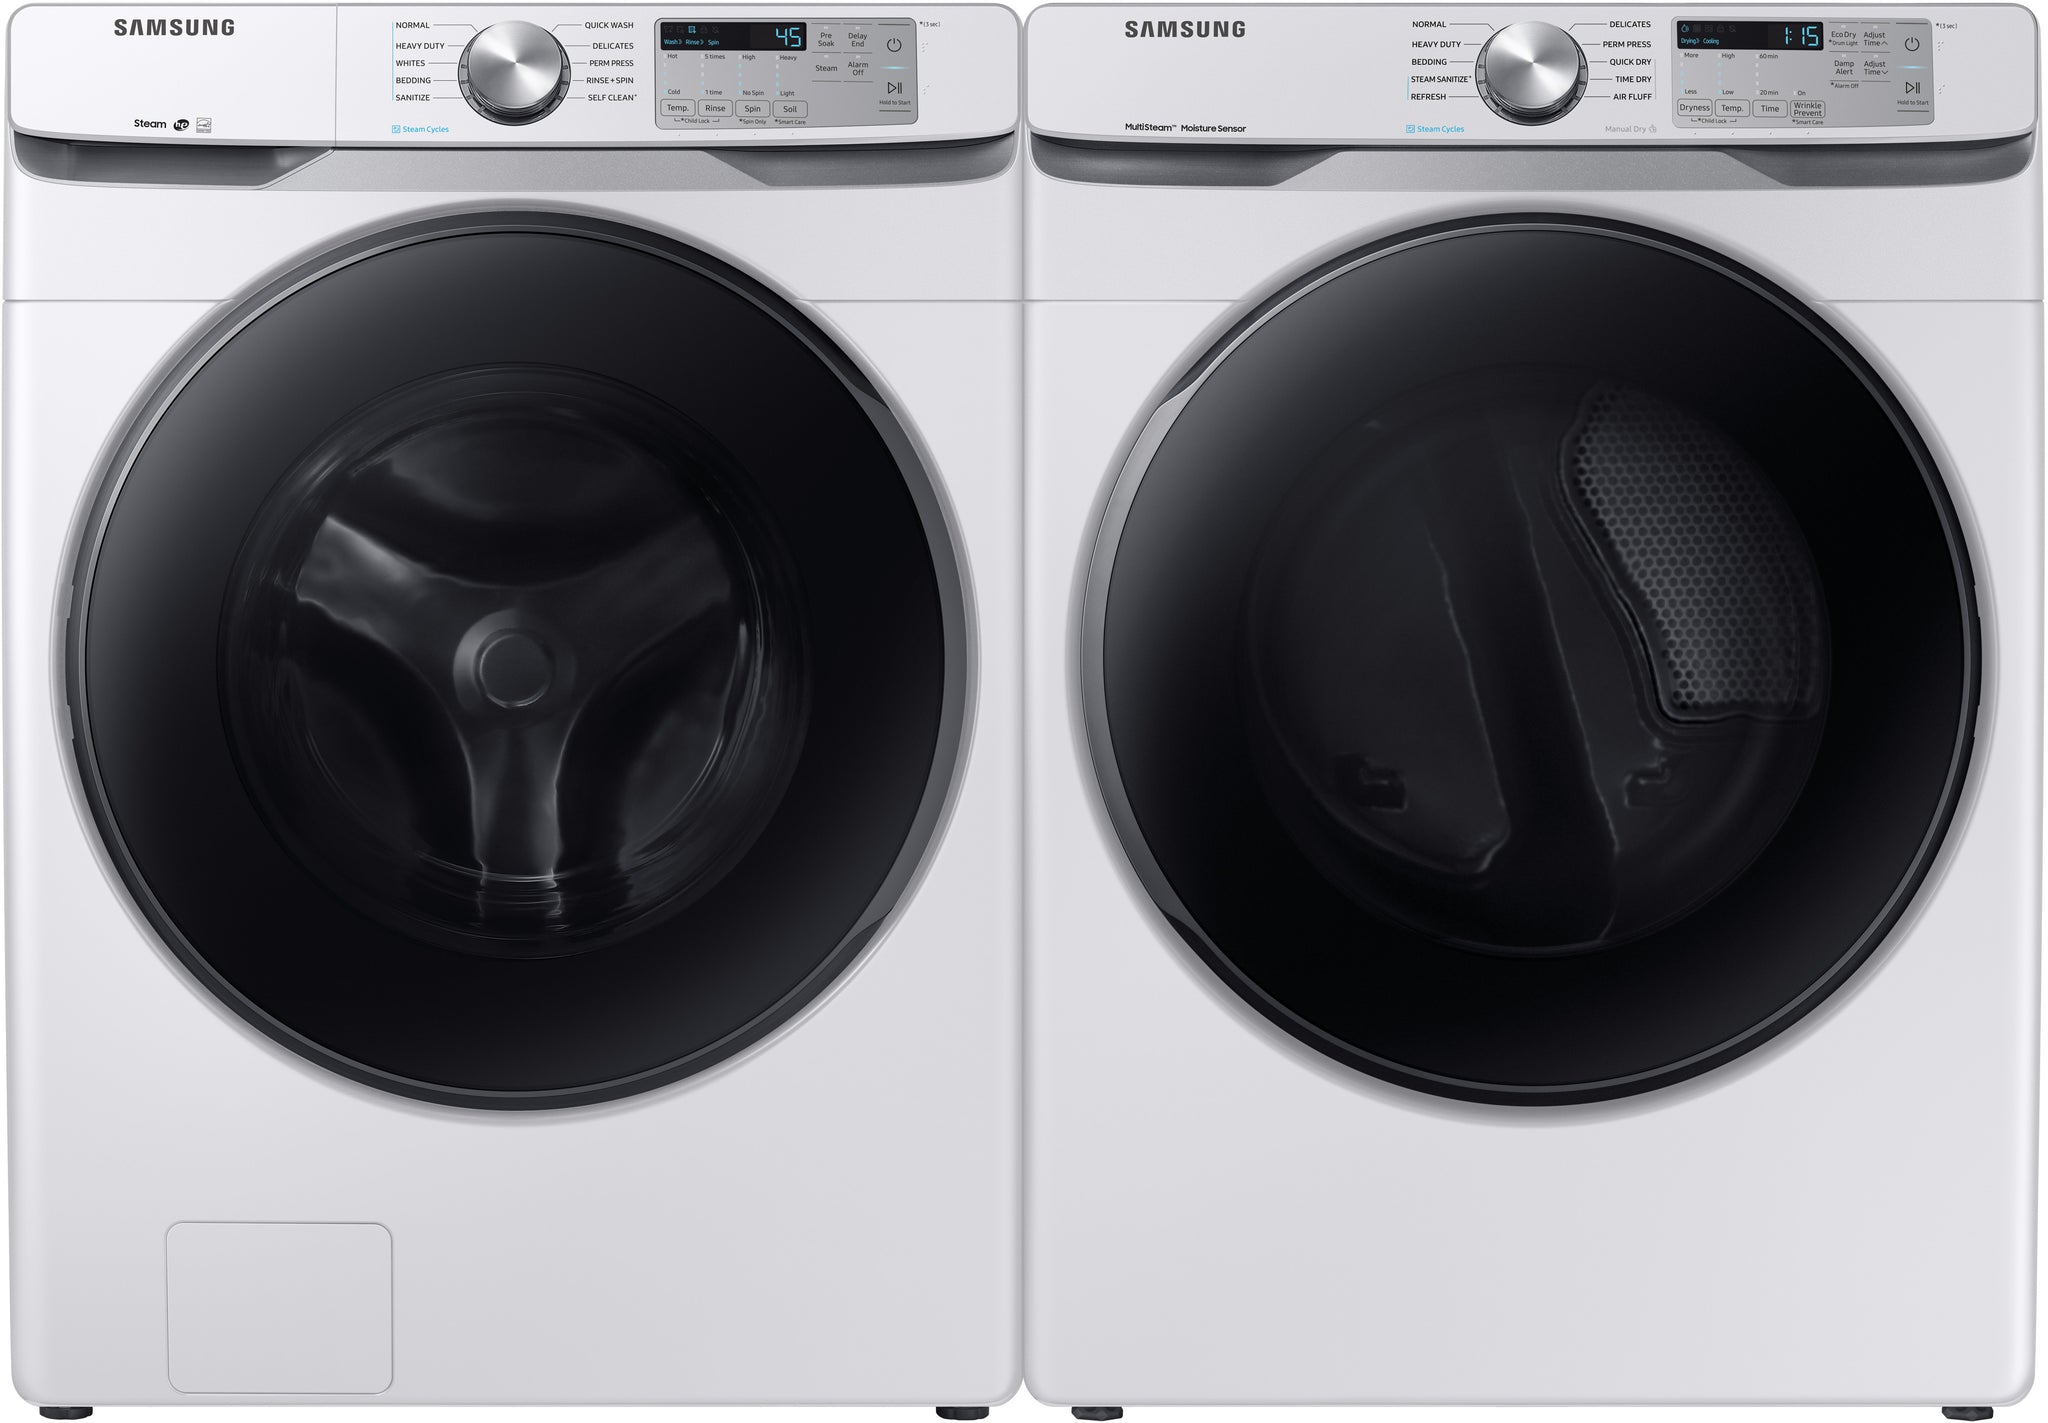 NEW: Samsung 4.5 cu. ft. Front Load Washer with Steam in White WF45R6100AW/US / WF45R6100AW/US + 7.5 cu. ft. Smart Electric Dryer with Steam Sanitize+ in White DVE45B6300W / DVE45B6300W/A3